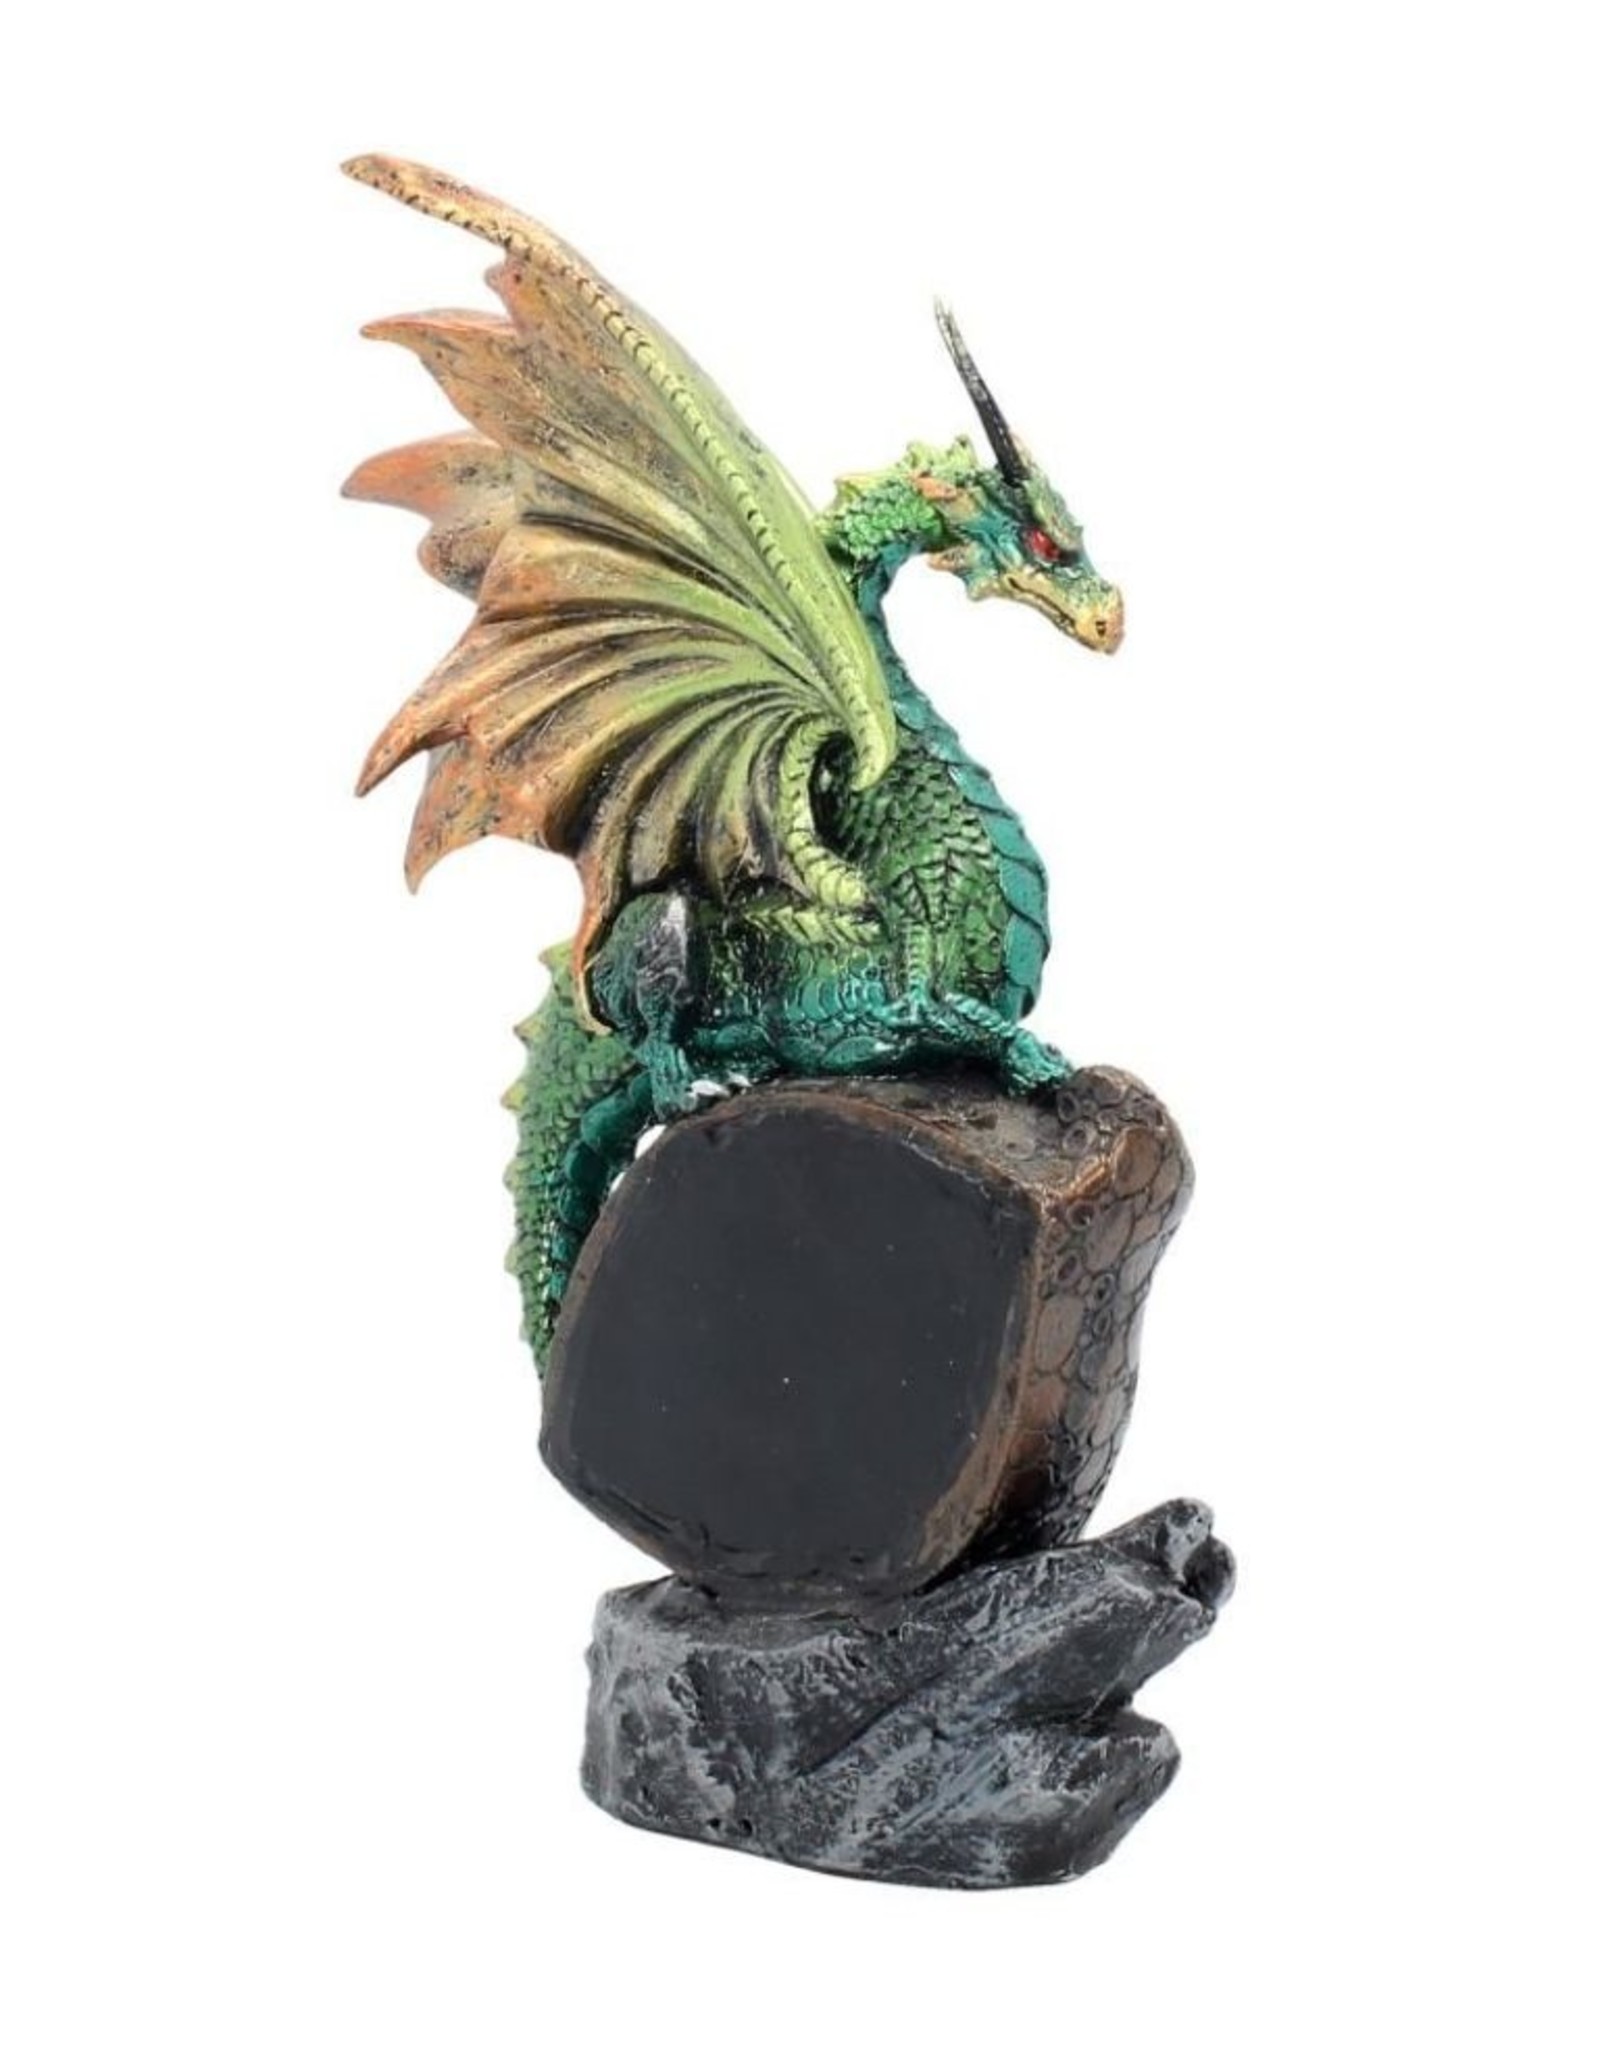 Alator Giftware & Lifestyle - Eye of the Dragon Light Up Red Figurine Ornament Green